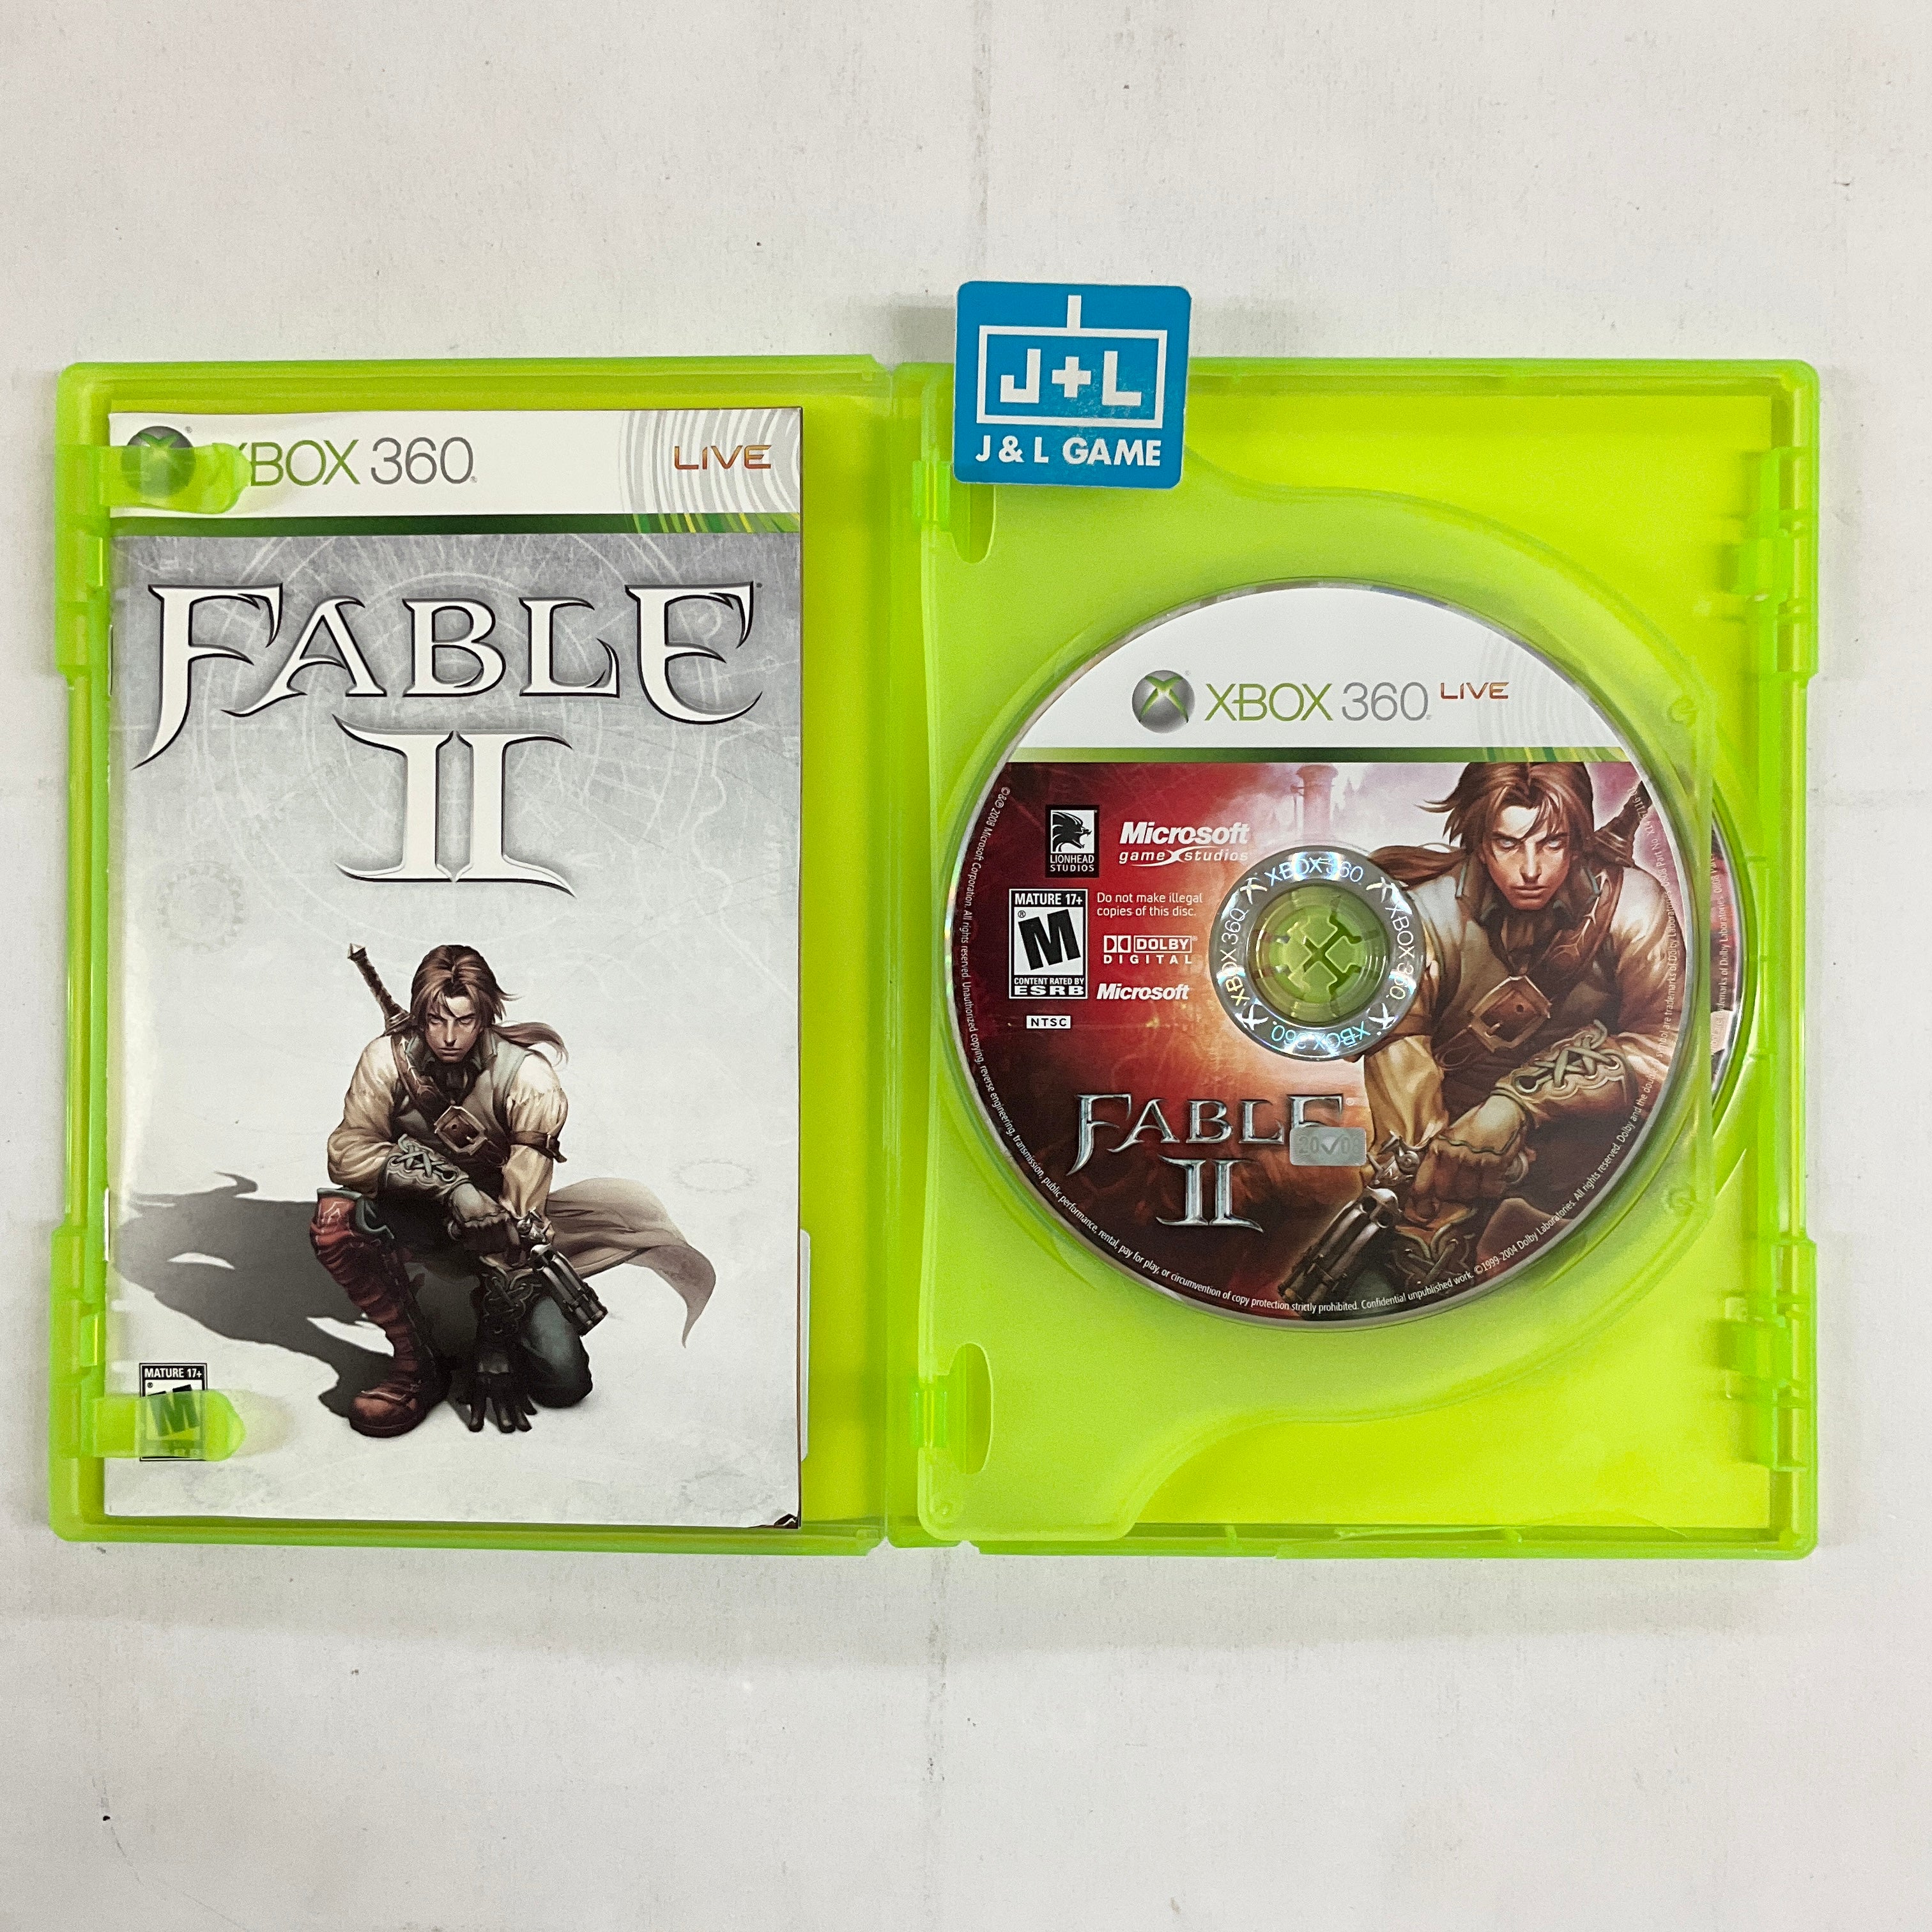 Fable II (Limited Collector's Edition) - Xbox 360 [Pre-Owned] Video Games Microsoft Game Studios   